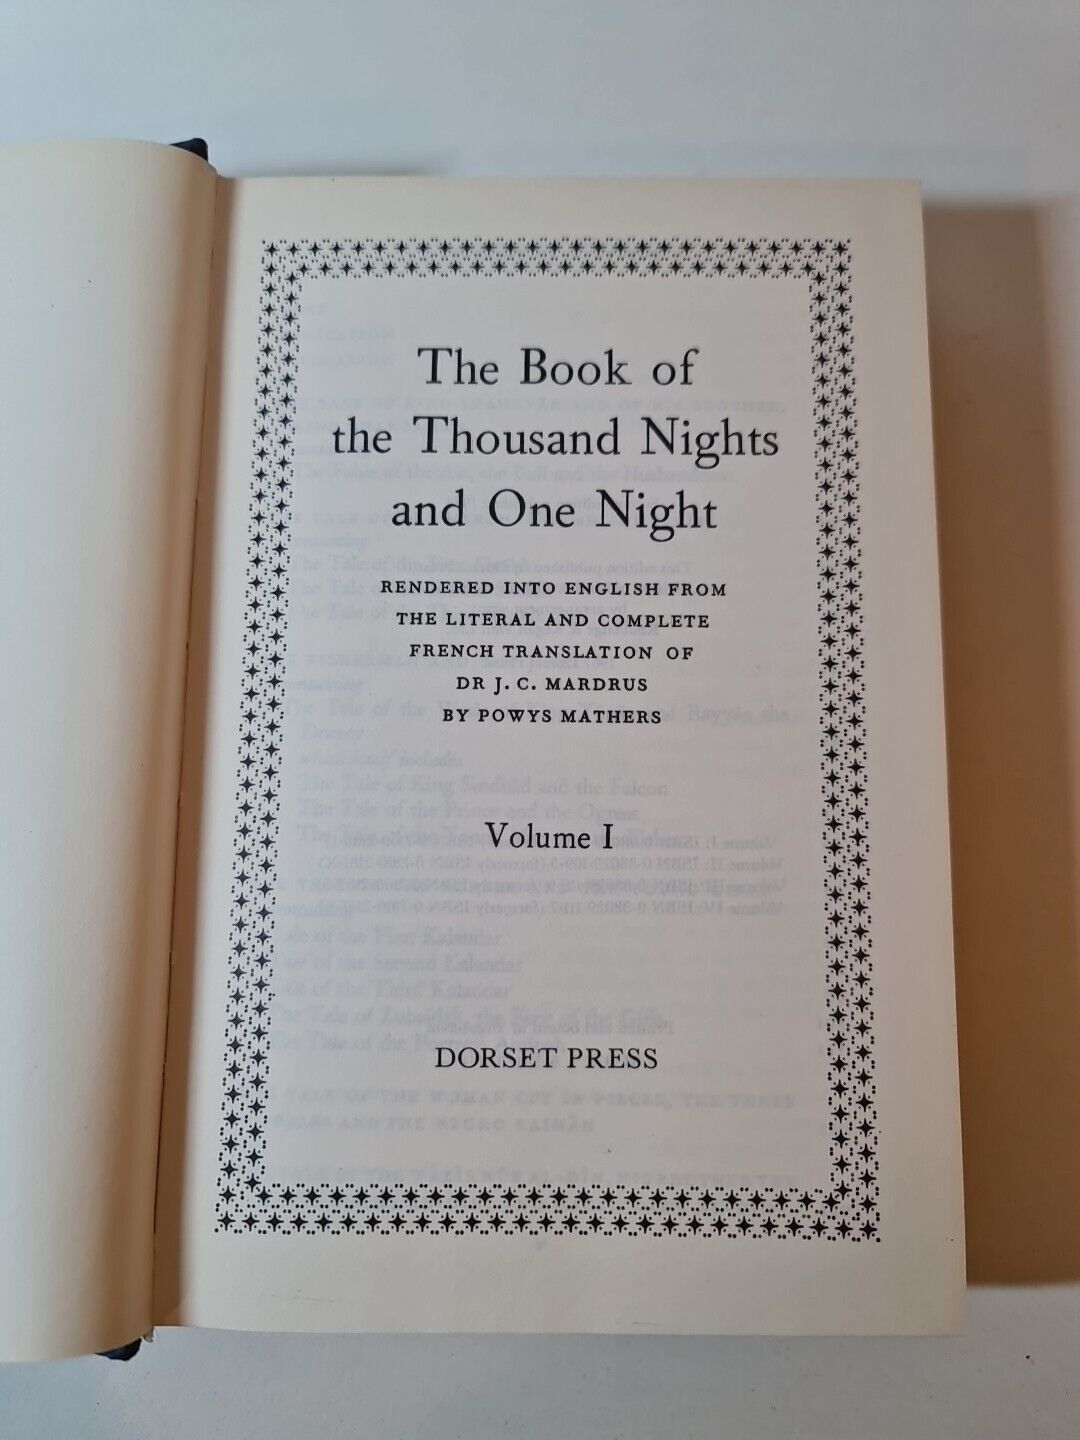 The Book of the Thousand Nights and One Night - 4 Vol Set (1987)